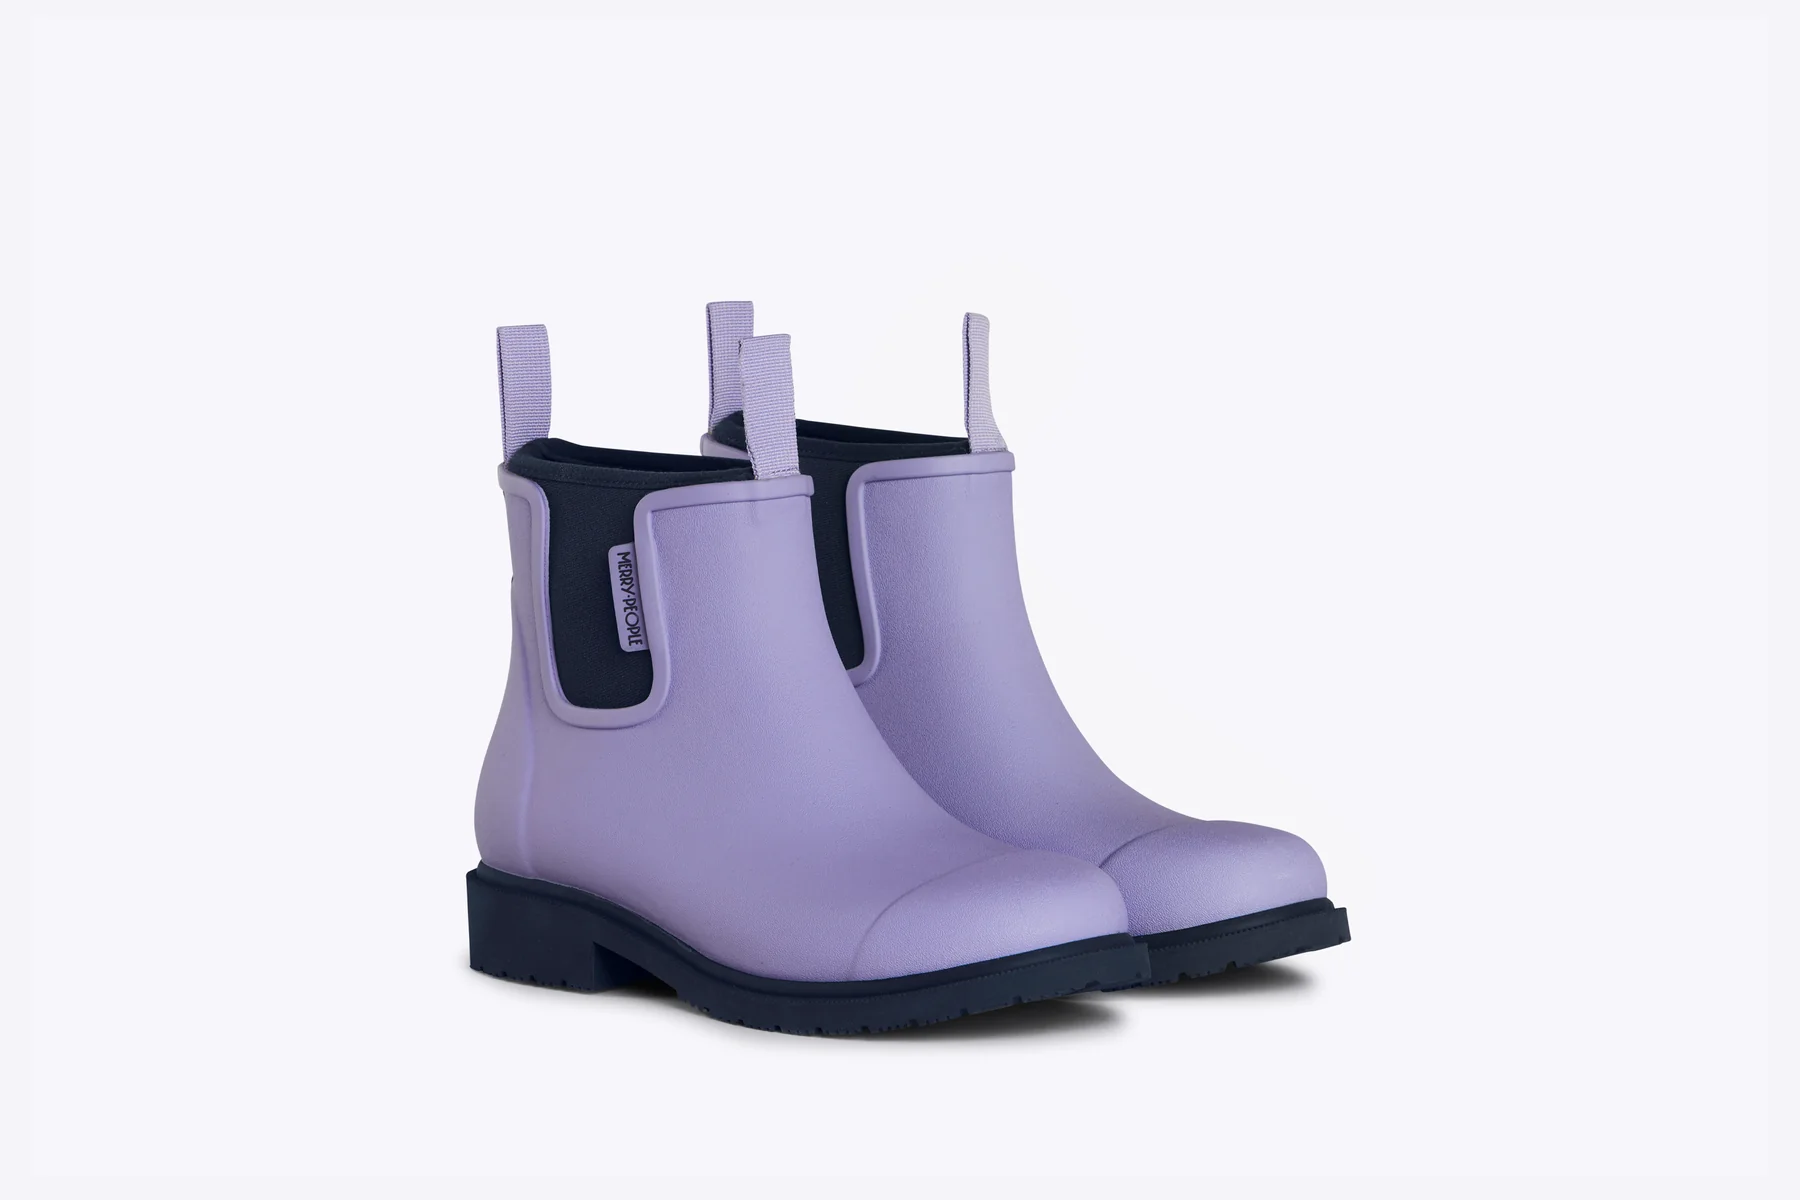 Bobbi Gumboots (Extra Traction) - Merry People shoes Merry People 